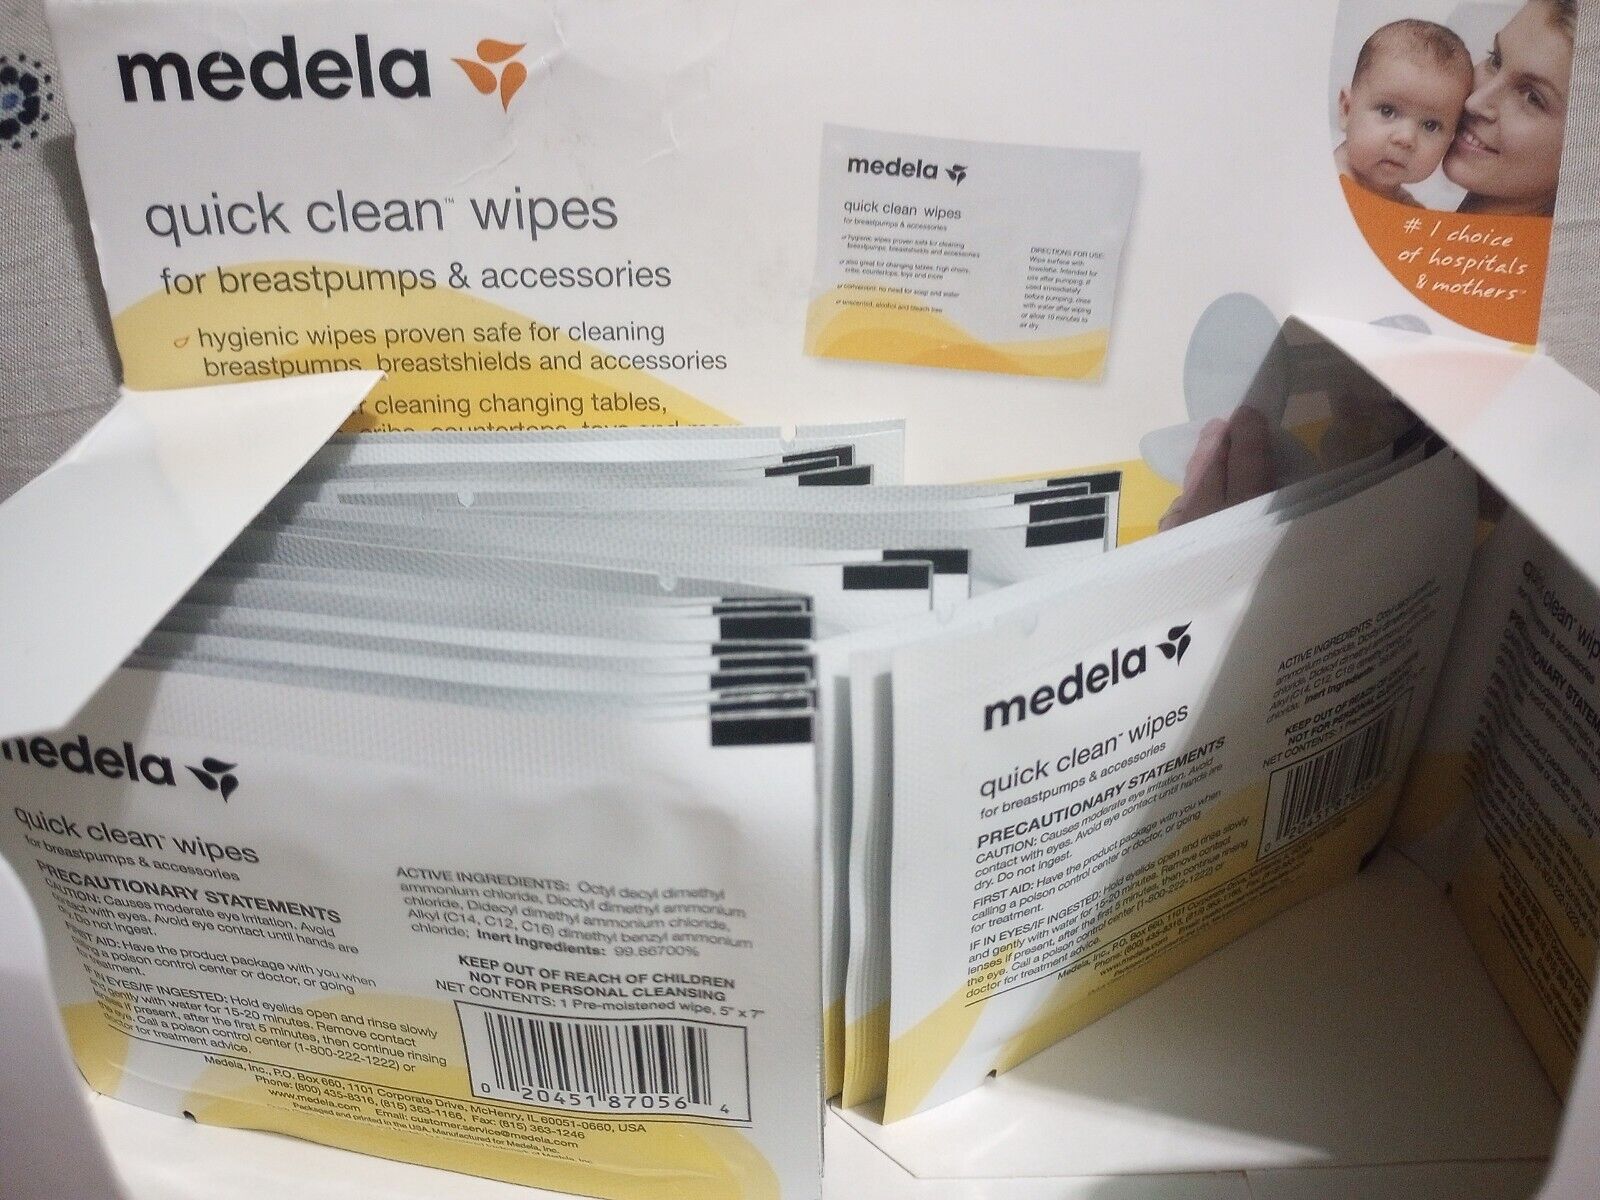 MEDELA -QUICK CLEAN WIPES For Breastpumps & Accessories 65 loose unopened wipes